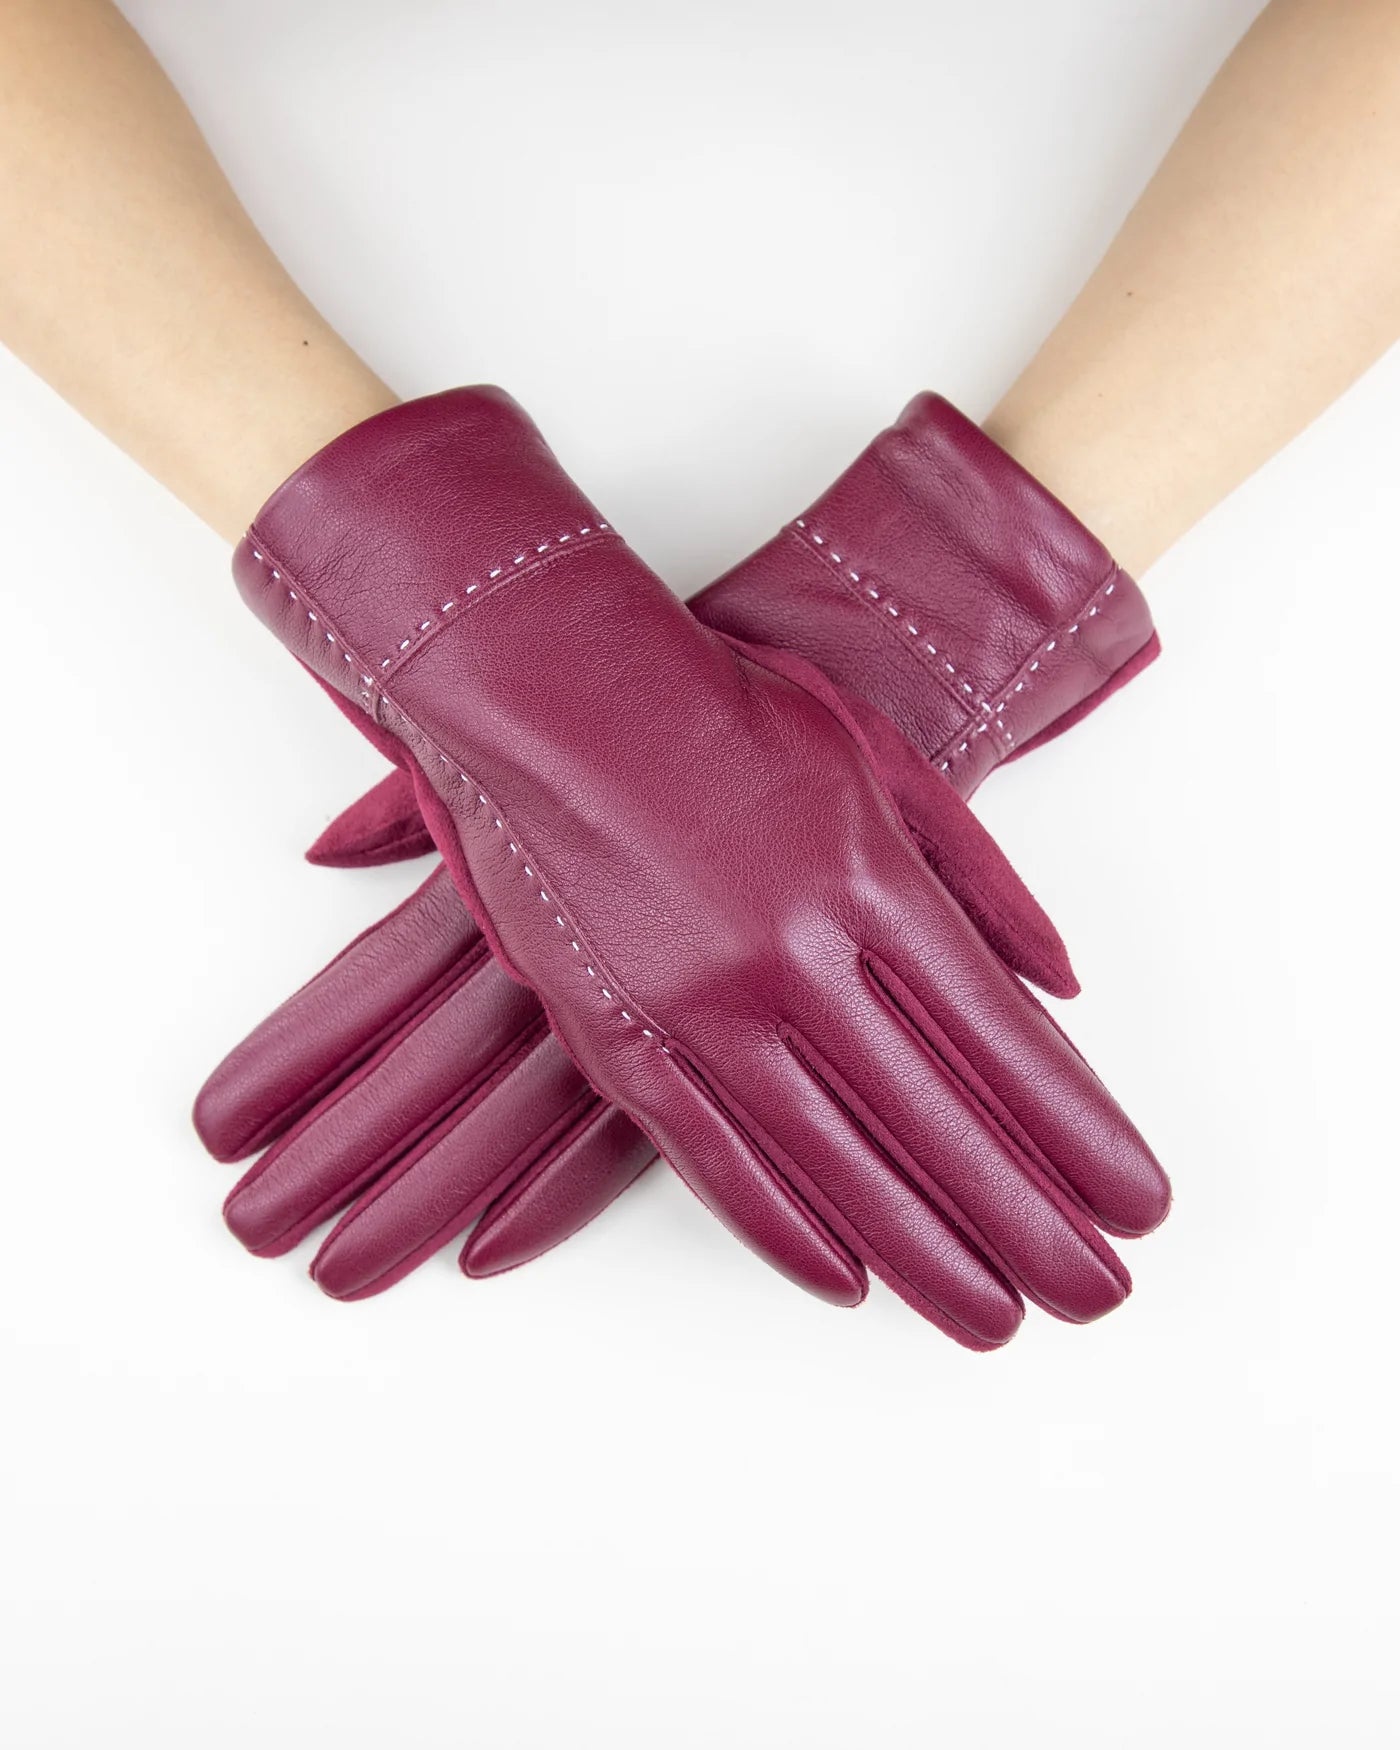 Vegan Leather Gloves - Accessorize In Style